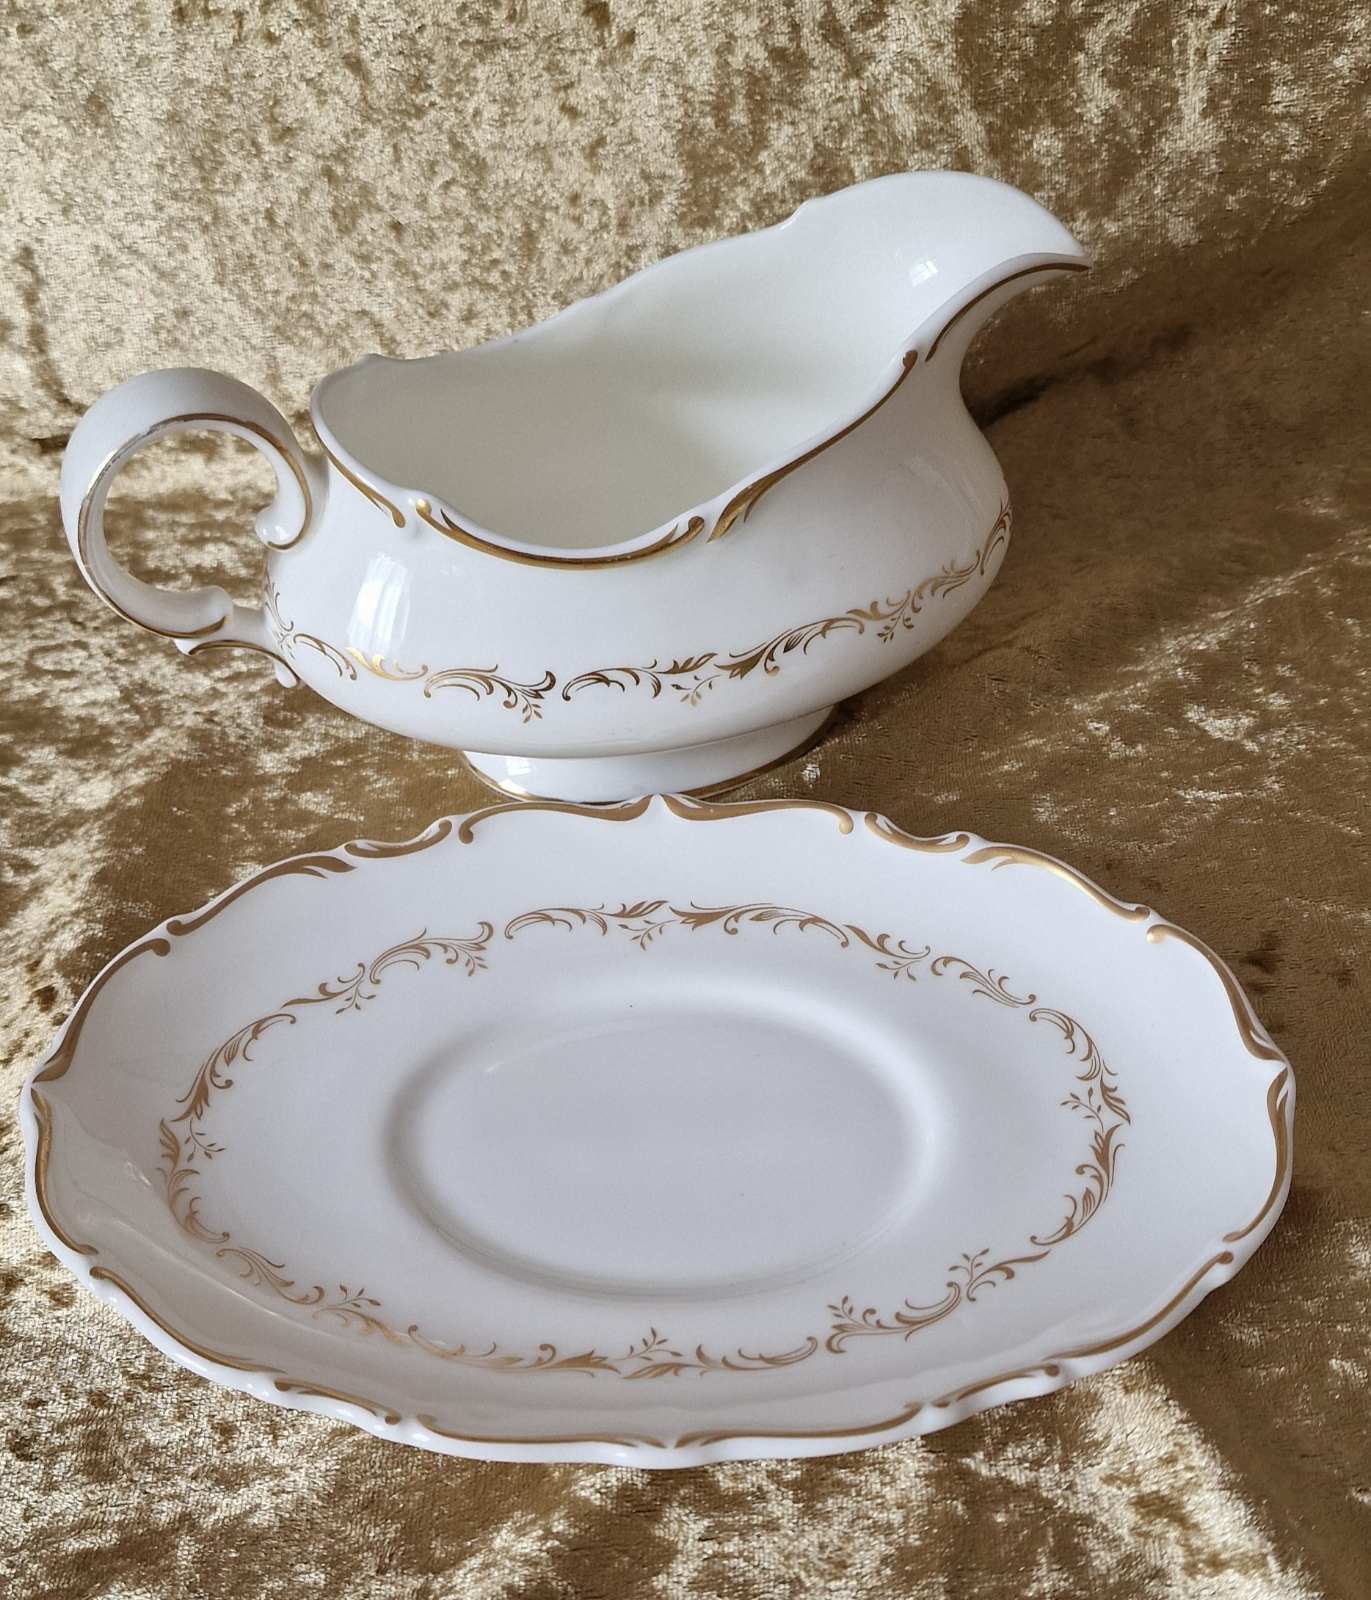 Royal Doulton "Richelieu" Sauce Boat and Stand